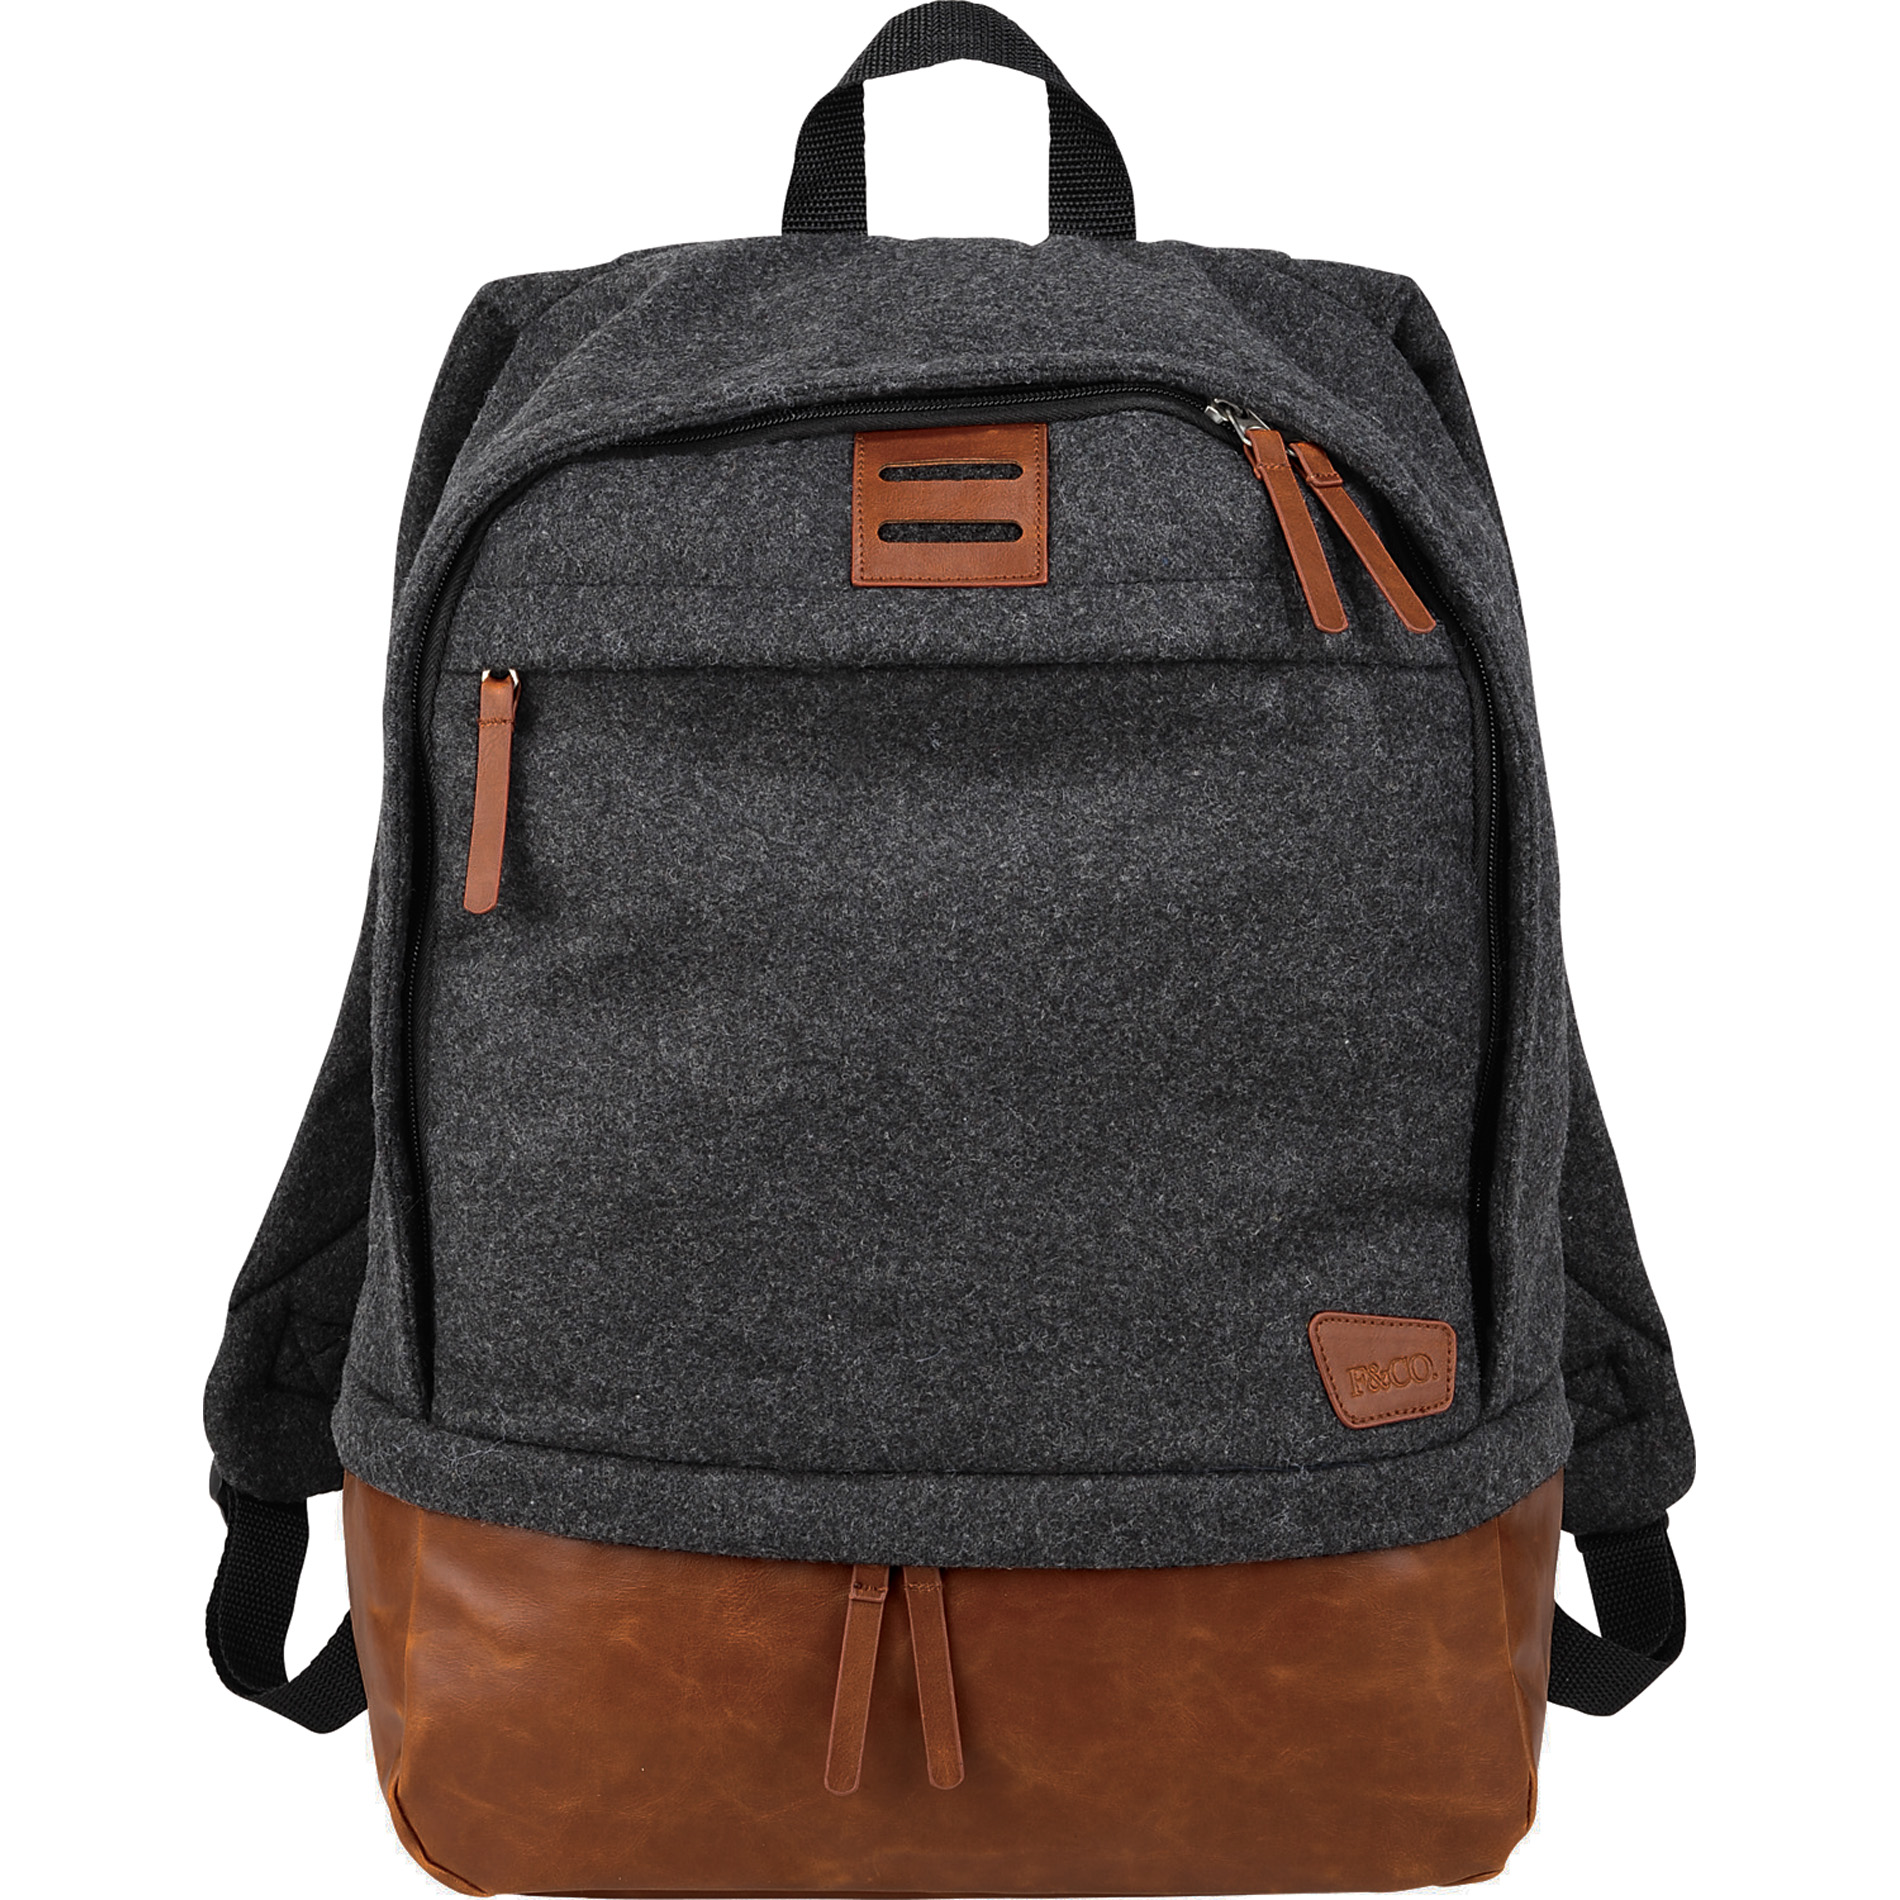 Field & Co. 7950-71 - Campster Wool 15" Computer Backpack